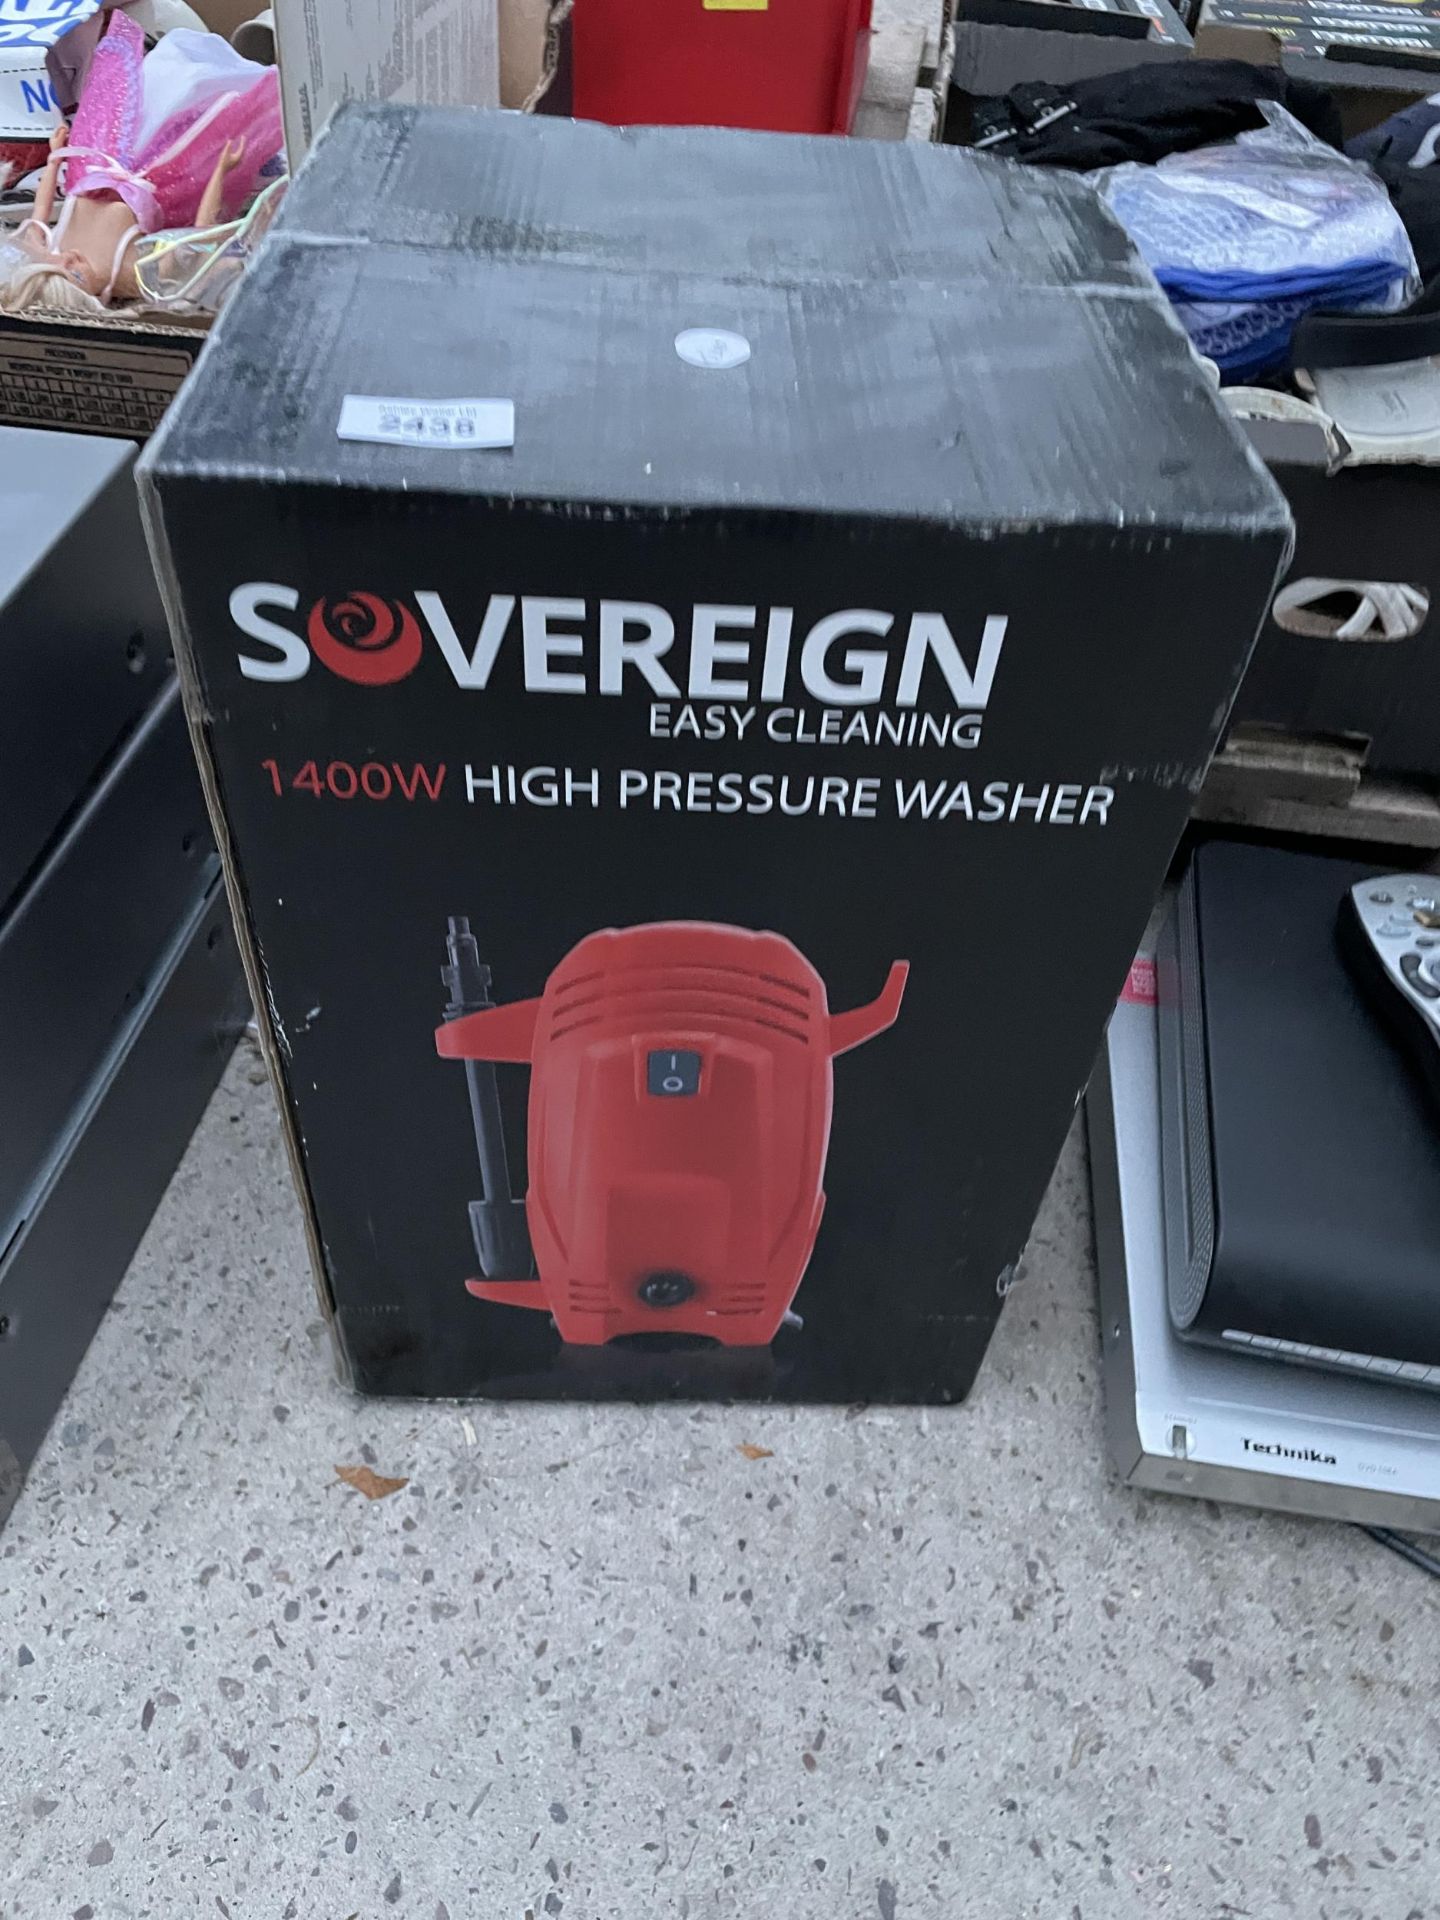 A SOVEREIGN PRESSURE WASHER